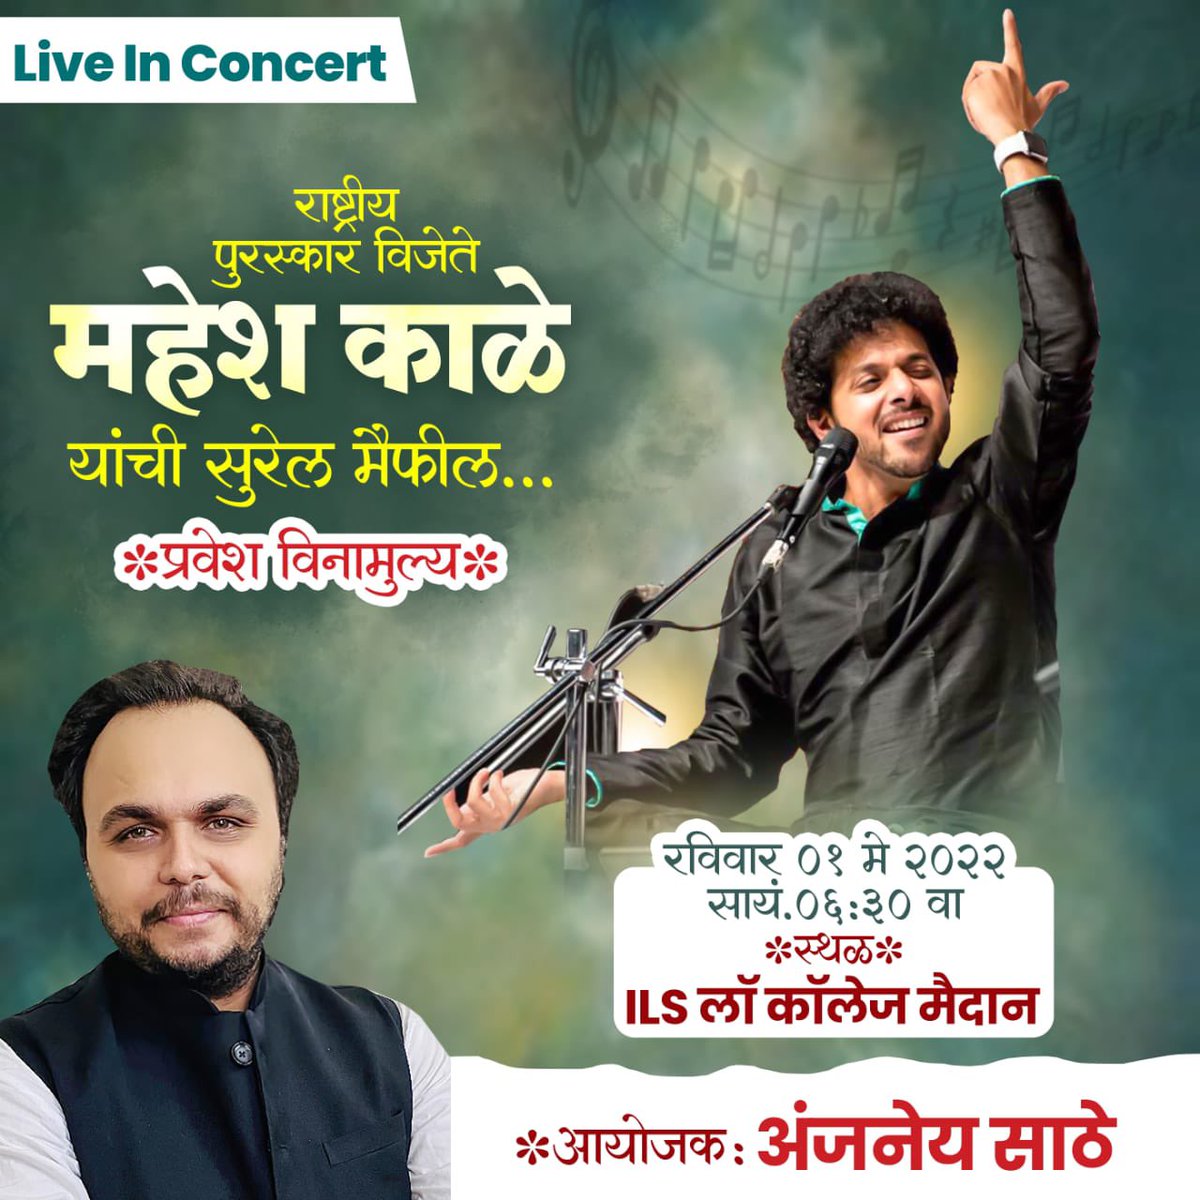 Folks in Pune: Singing at Law College at 6.30pm. Concert is Free for all. Looking forward to seeing you all!! 

#Maheshkale #maheshkalelive #MKconcerts #indianclassicalmusic #MkMusings #MaharashtraDin